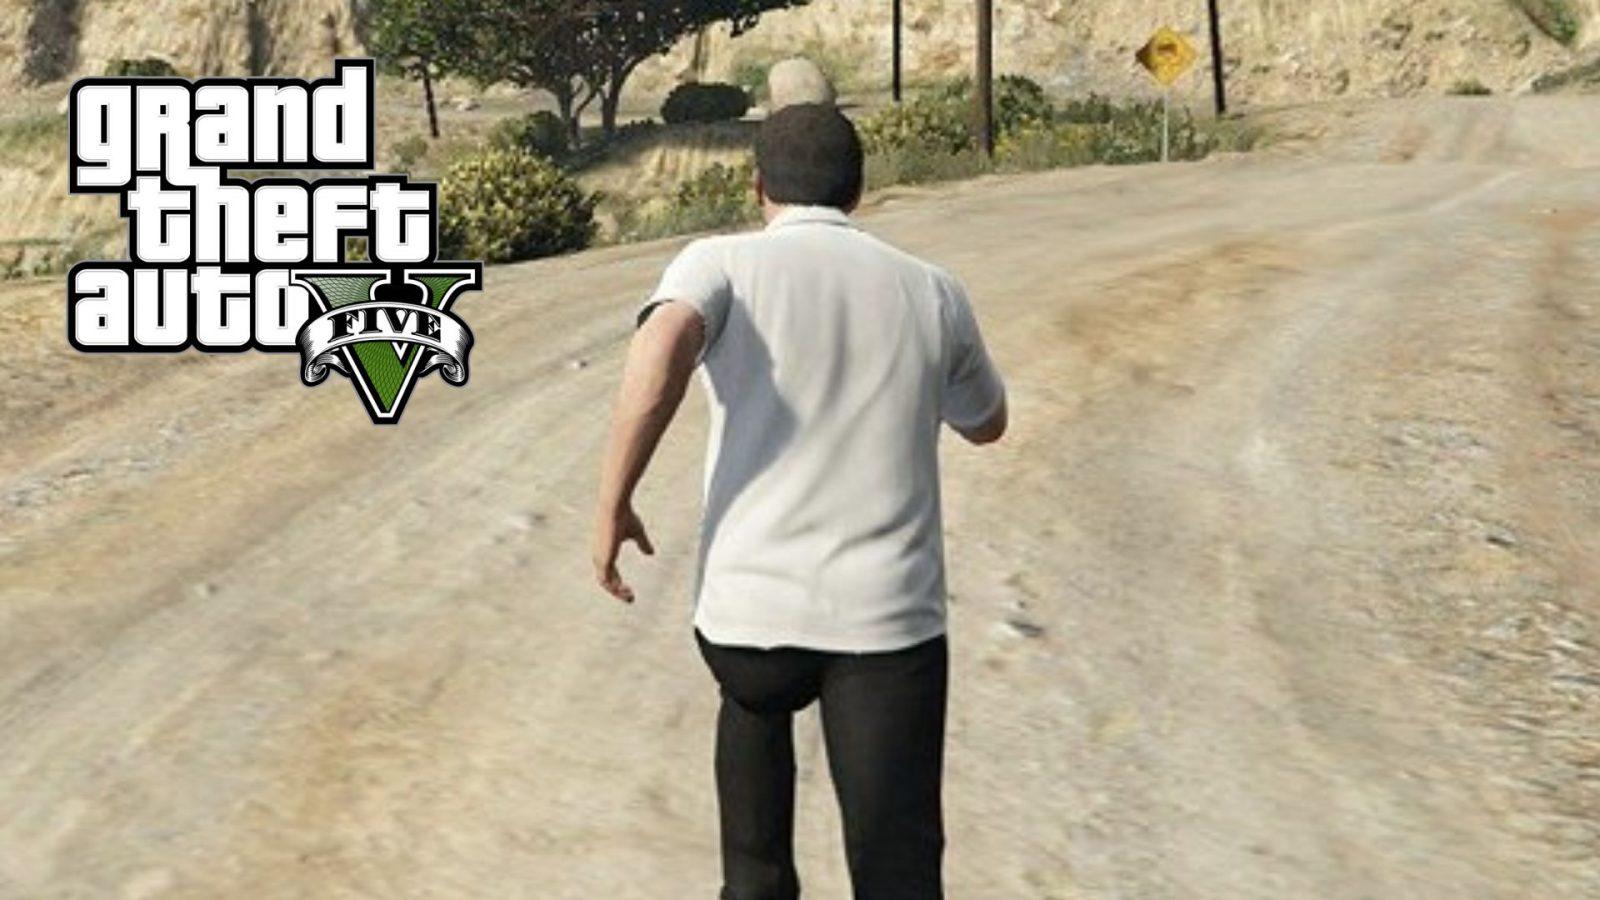 Stepping into the World of Grand Theft Auto V